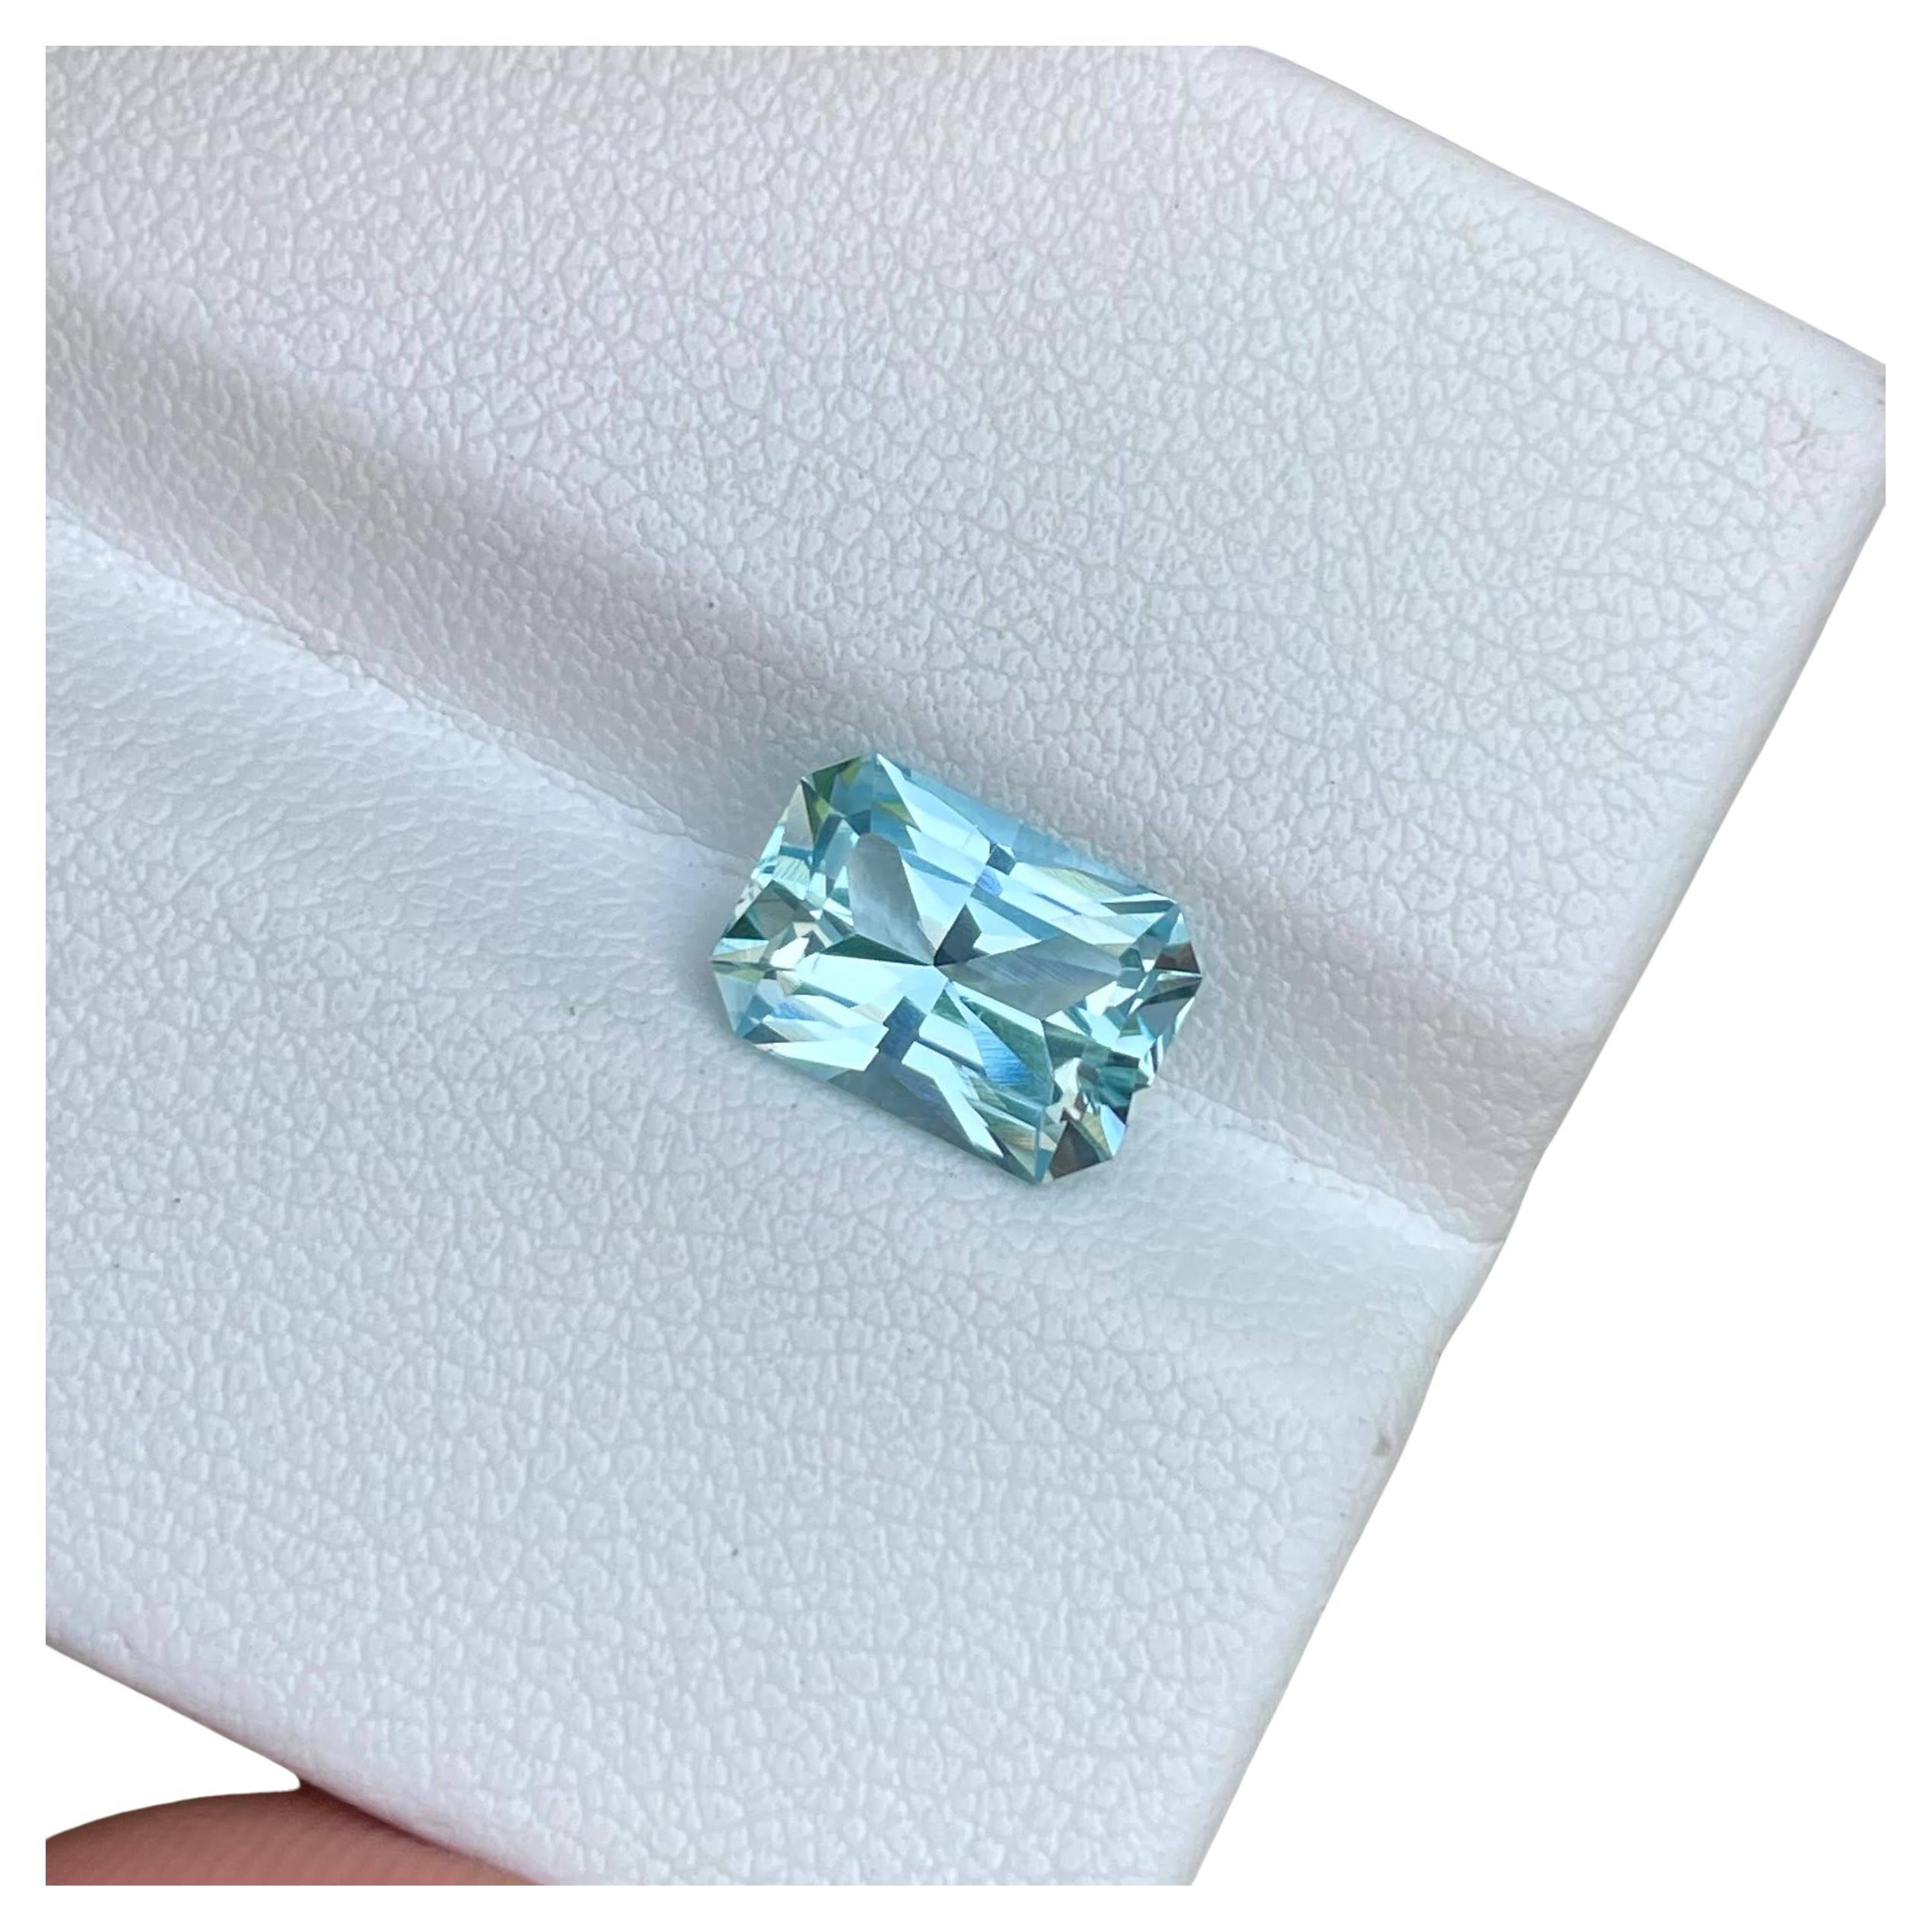 Weight 2.15 carats 
Dimensions 9.43x6.71x4.91 mm
Treatment none 
Origin Nigeria 
Clarity eye clean 
Shape octagon 
Cut Custom Precision 




This exquisite gemstone boasts a captivating 2.15 carat Aquamarine of unparalleled quality, sourced from the